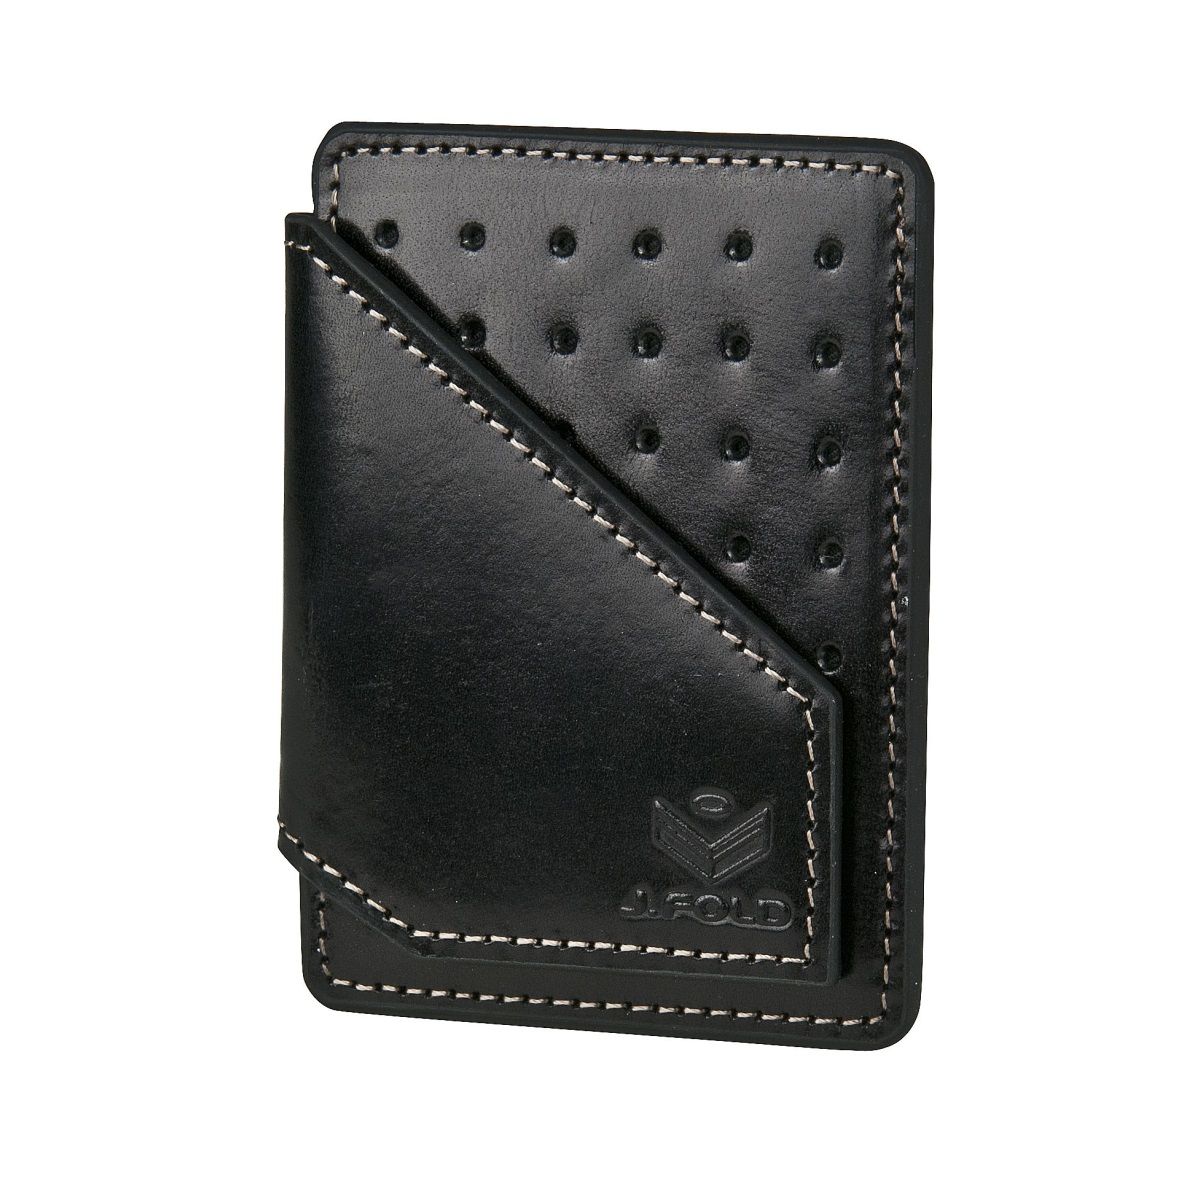 leather card carrier